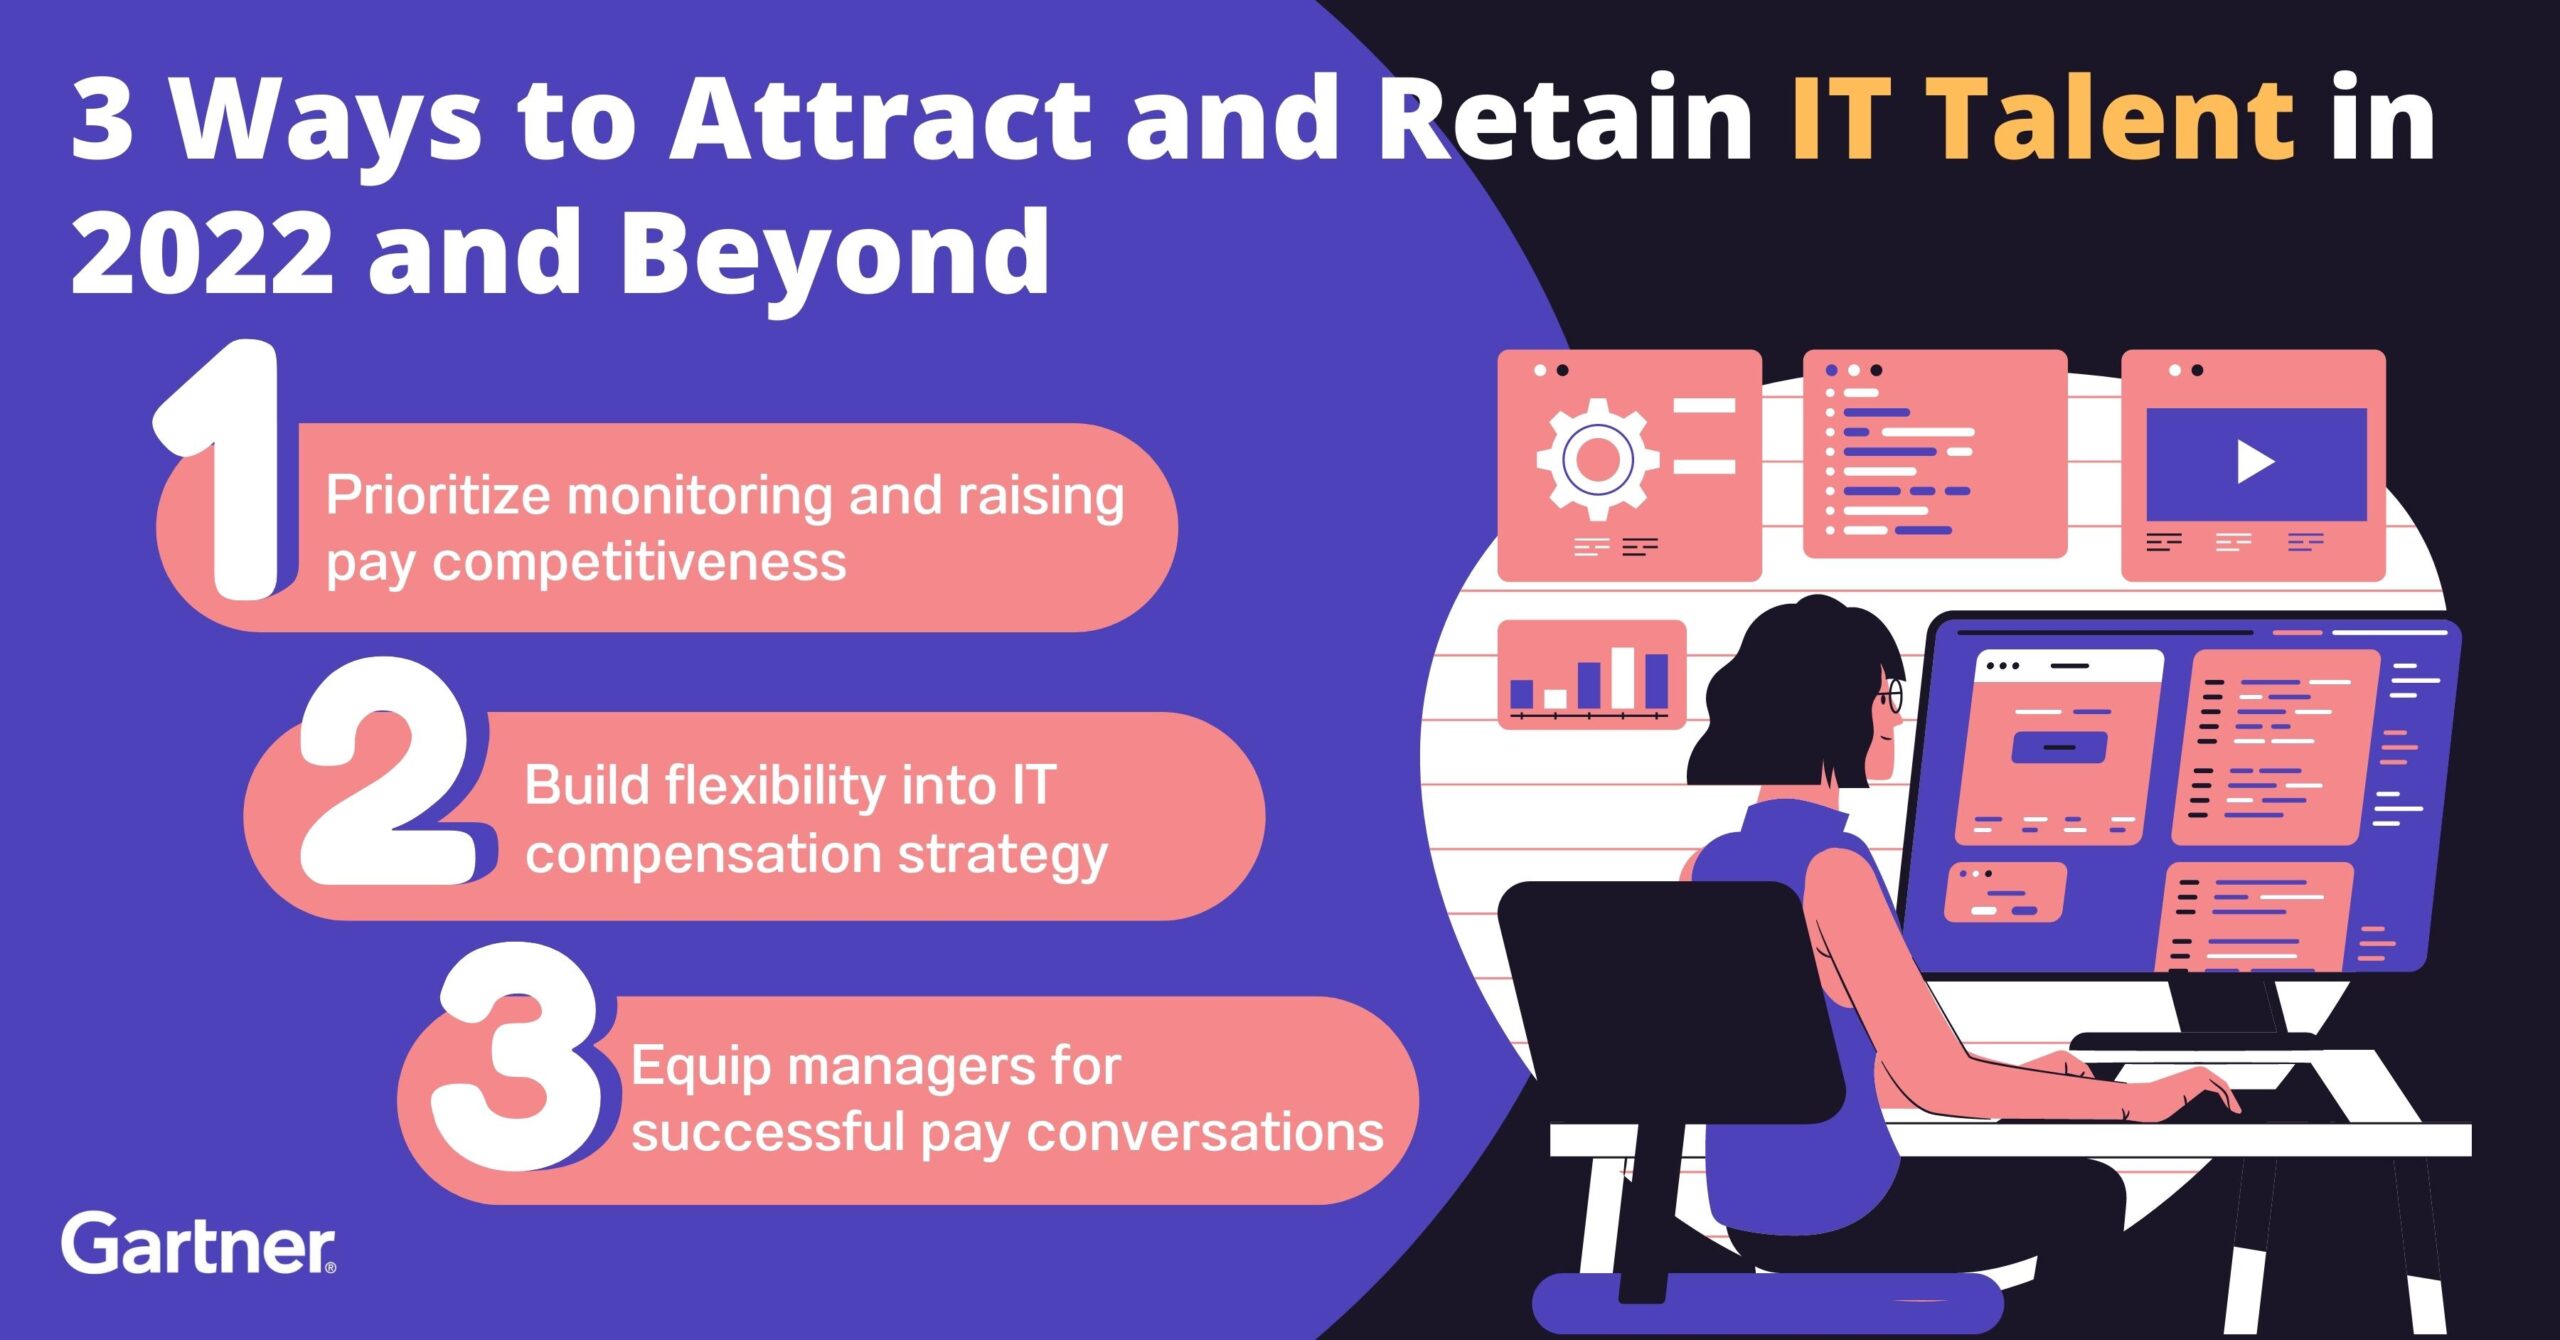 3 Ways to Attract and Retain IT Talent in 2022 and Beyond